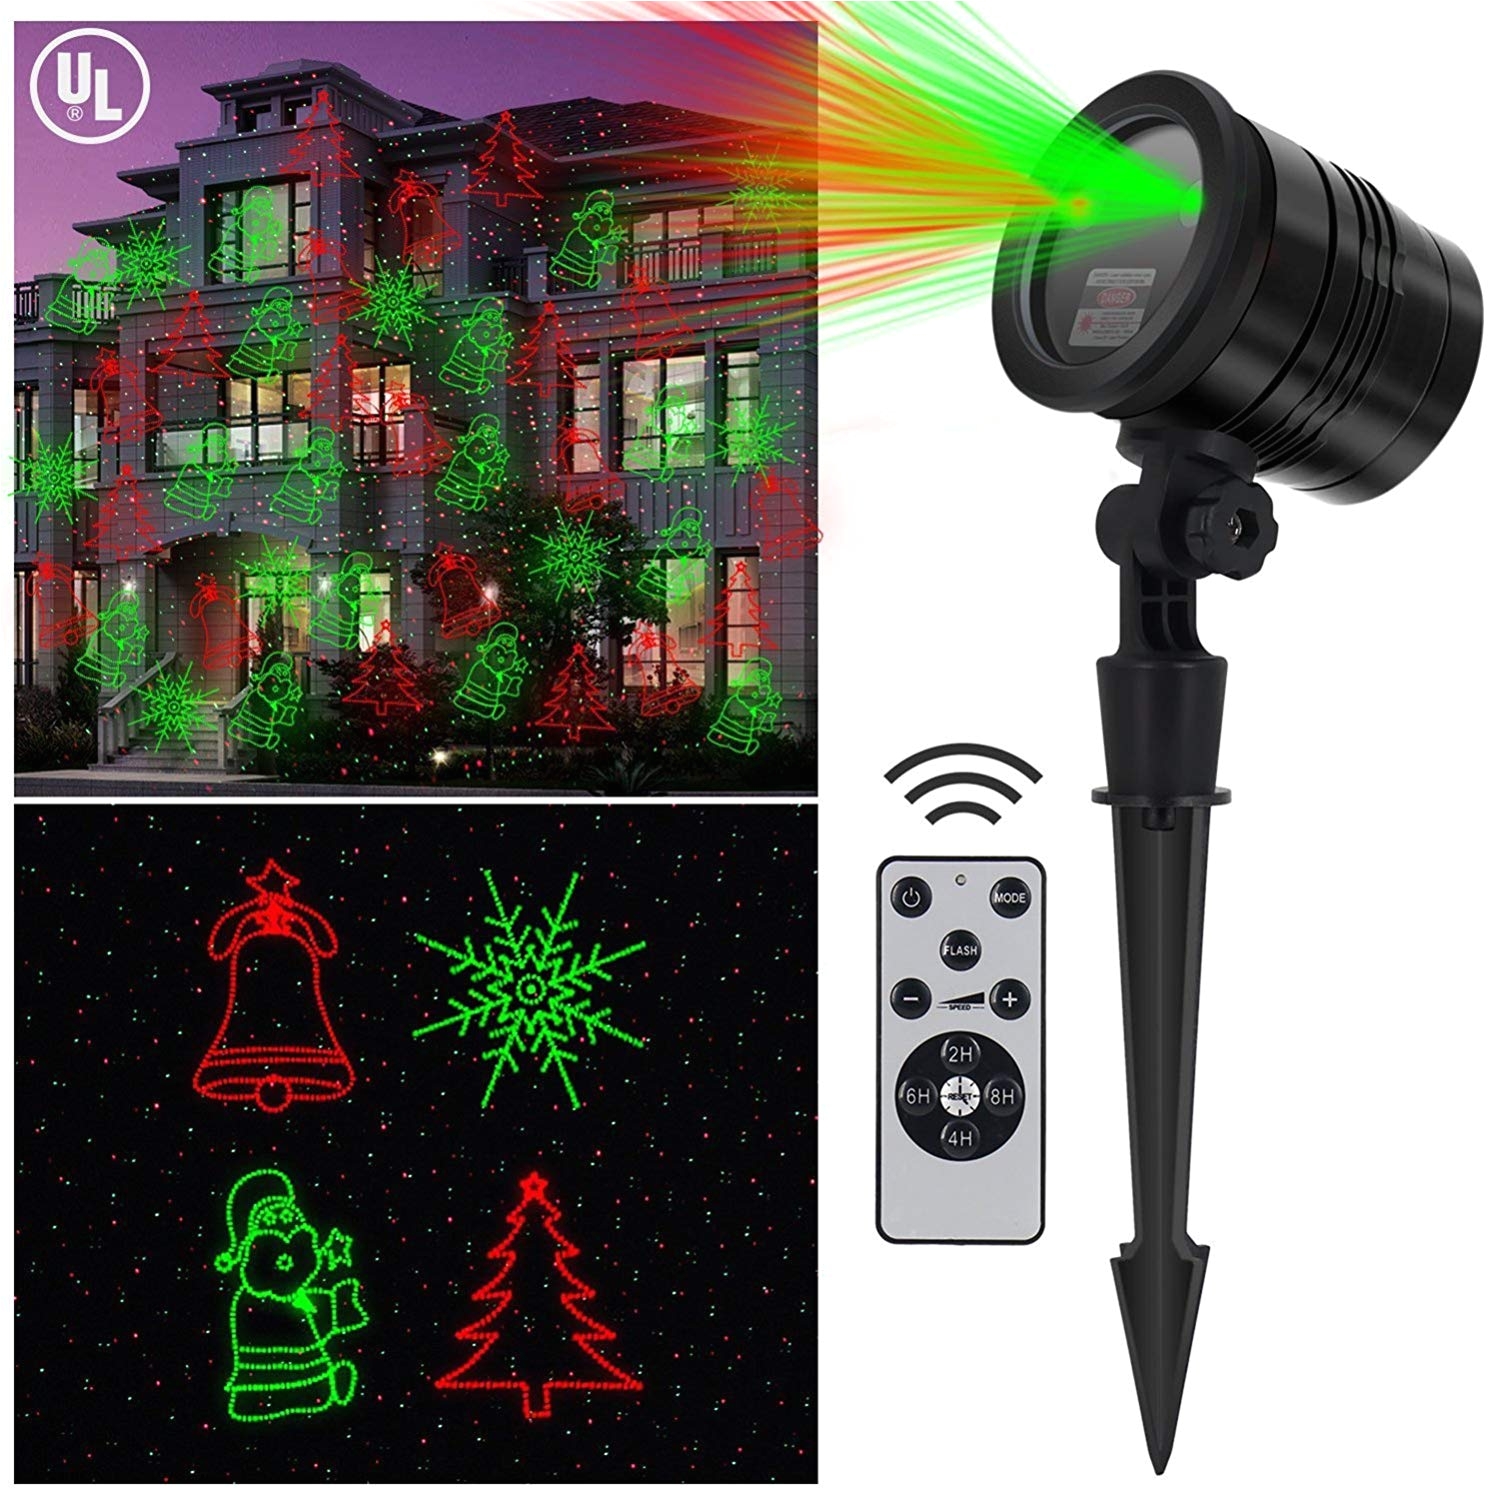 amazon com lightess christmas laser lights projector indoor outdoor laser light with remote control 5 patterns red and green slide star show for xmas